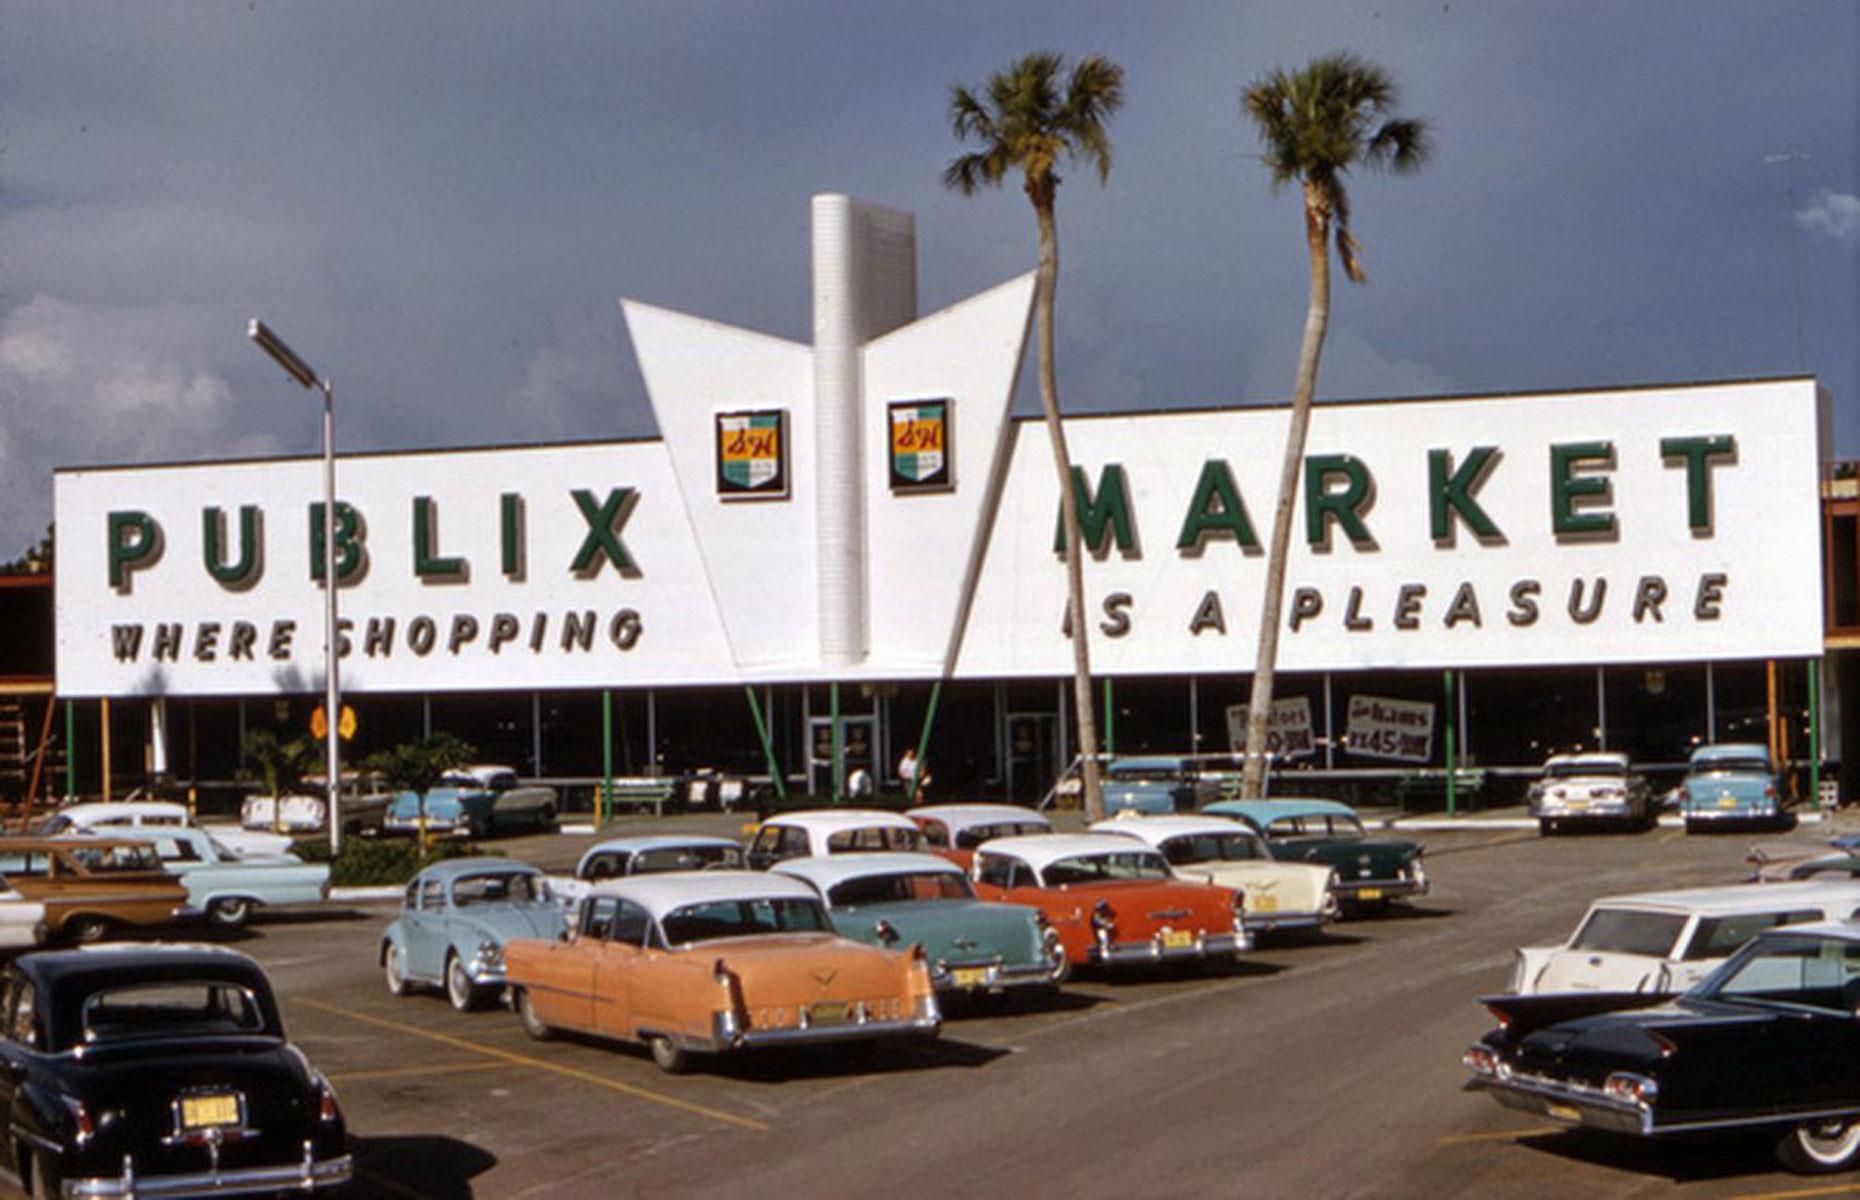 1959 – Publix: $1,000 invested then is worth $16.2 million (£12.3m) today